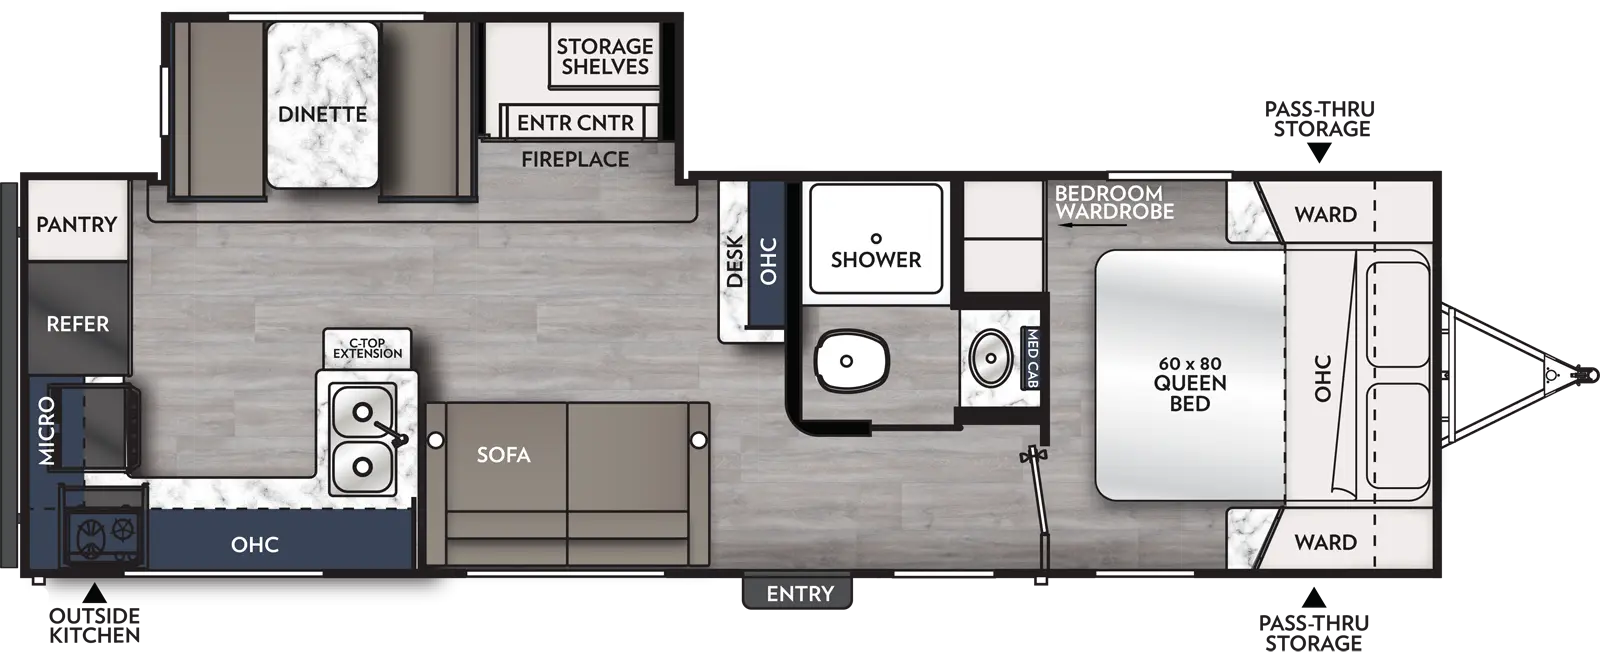 The 264RKS has 1 slide out on the off-door side and 1 entry door. Exterior features include a rear off-door side outside kitchen and front pass-through storage. Interior layout from front to back includes: front bedroom with foot-facing 60 x 80 Queen bed, opposing side wardrobes and overhead cabinet; off-door side bathroom with shower, toilet, sink and medicine cabinet; door-side sofa; rear-facing desk with overhead cabinet; off-door side slide out holding a dinette, entertainment center, fireplace and storage shelves; rear kitchen with L-shaped countertop, double basin sink in the peninsula, countertop extension, stovetop, overhead cabinets, overhead microwave, and refrigerator and pantry on the rear wall.